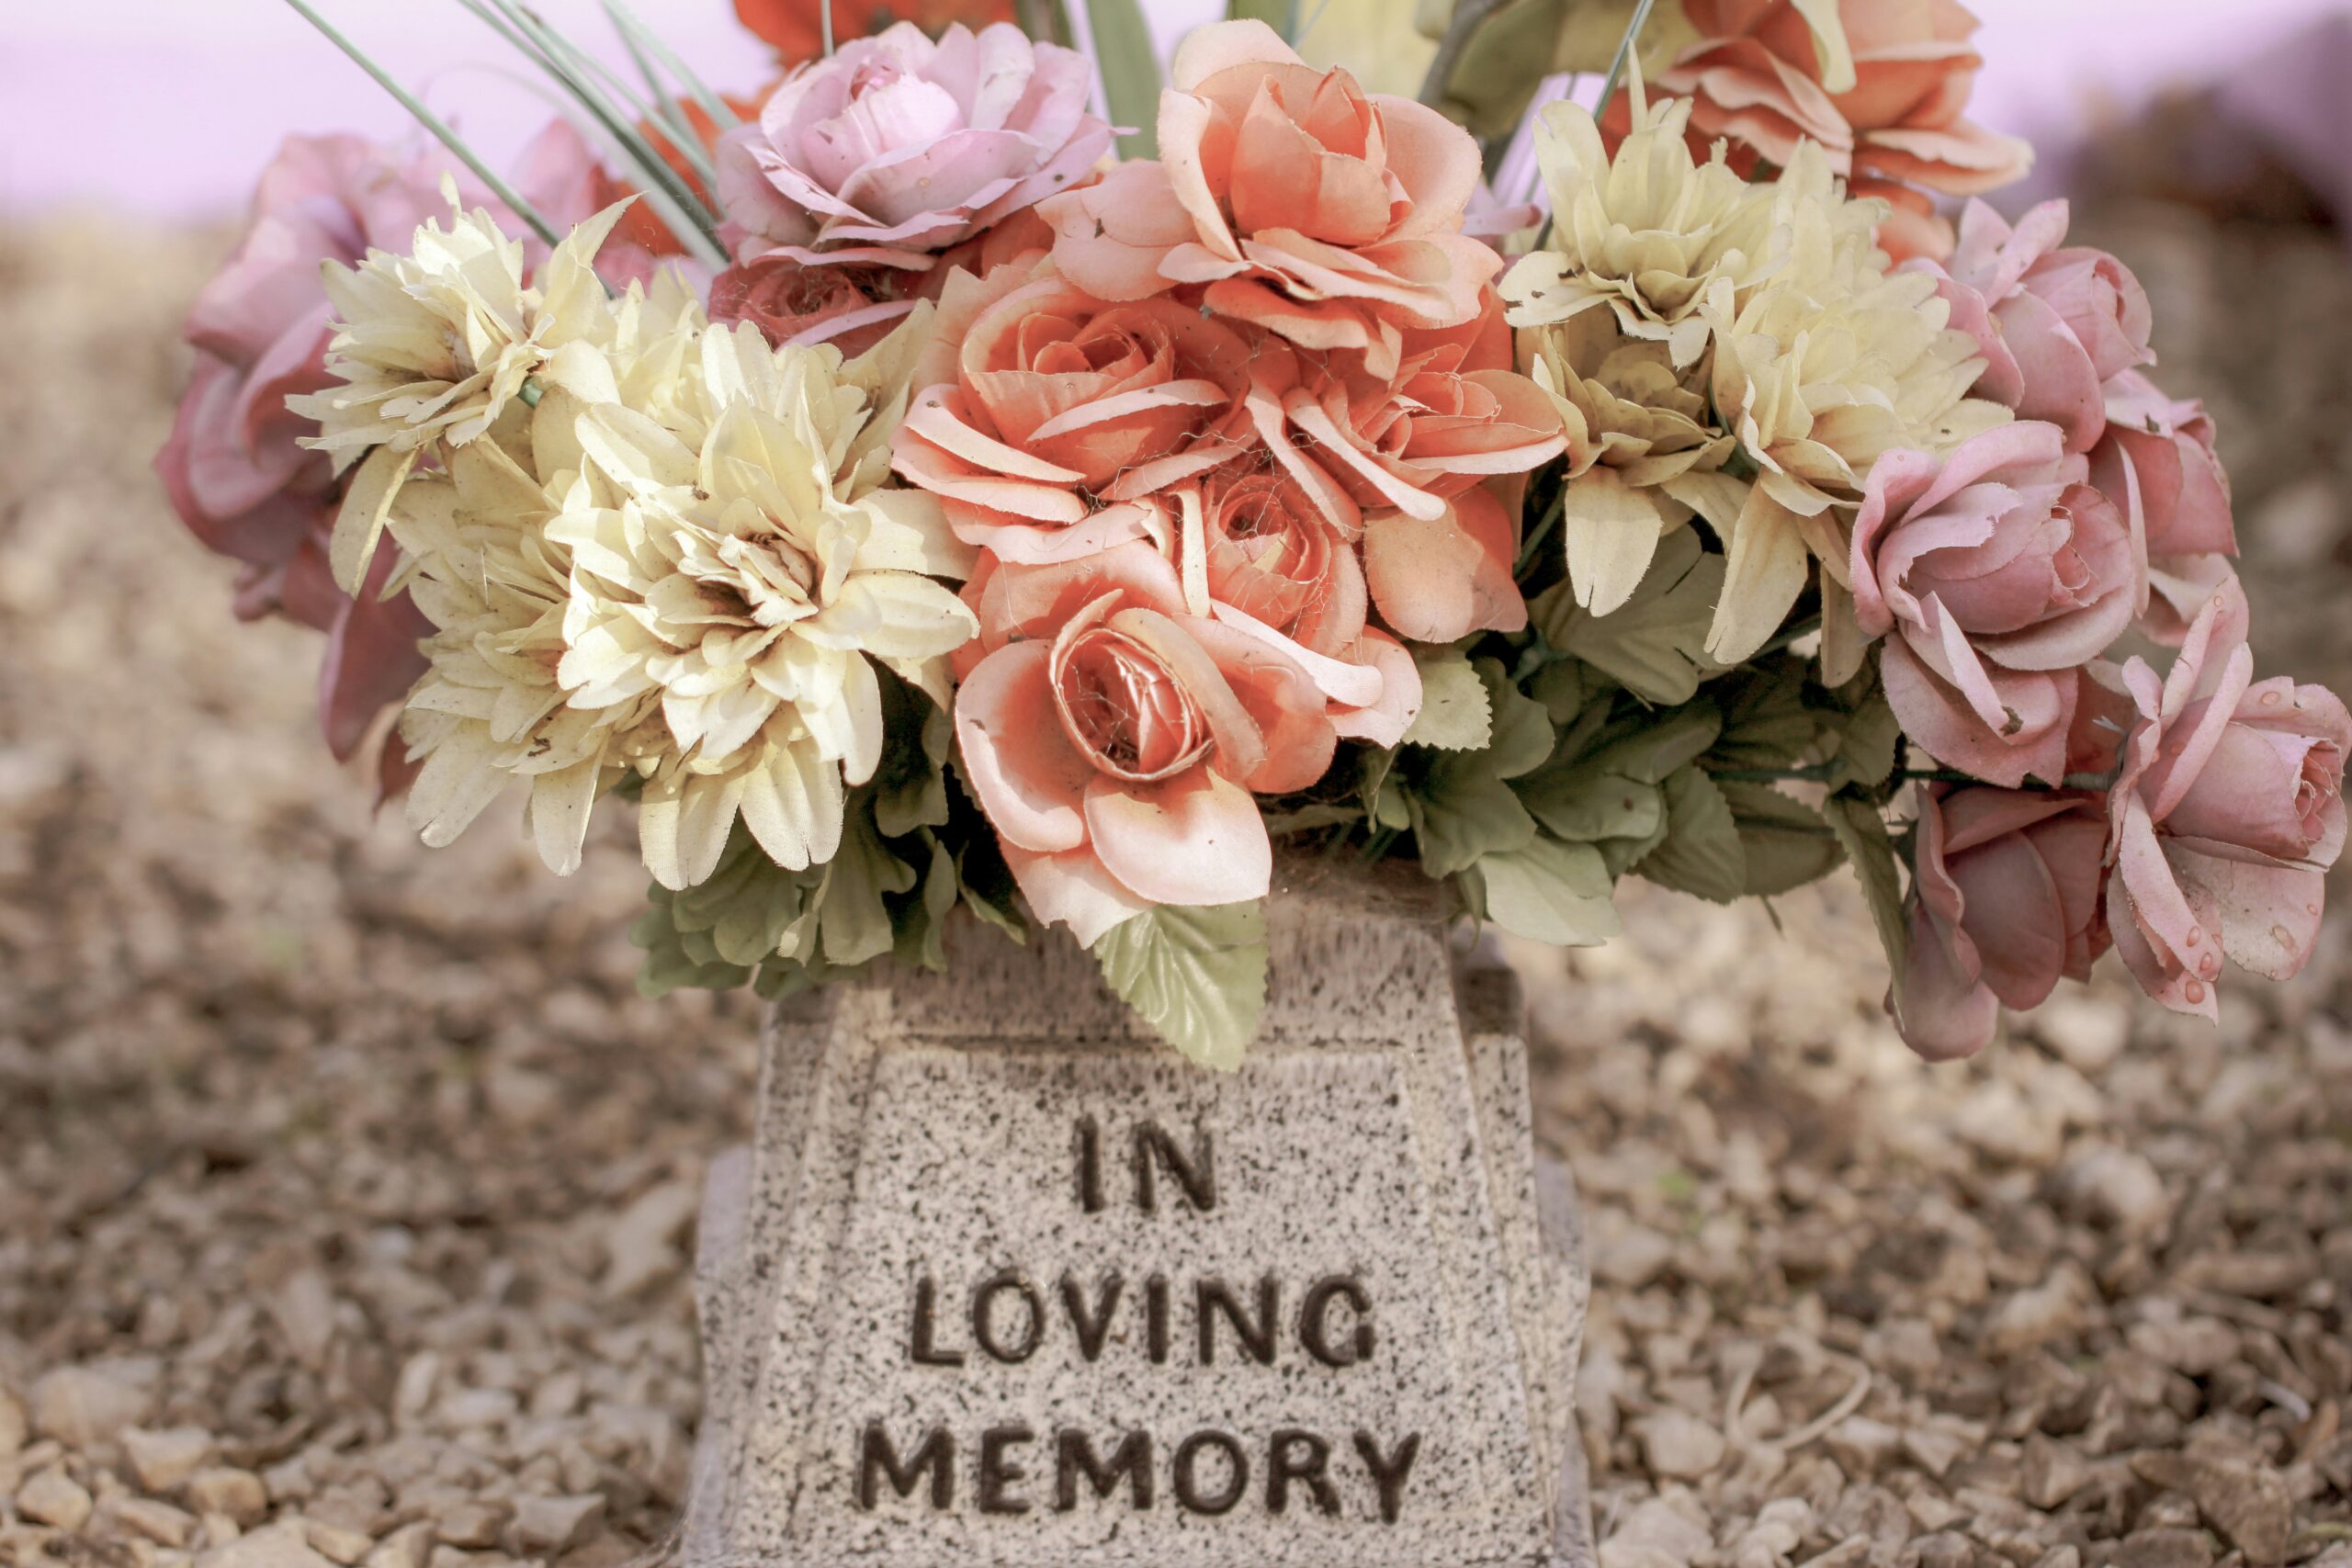 Pink and white flowers on gray concrete tomb for an article on wrongful death